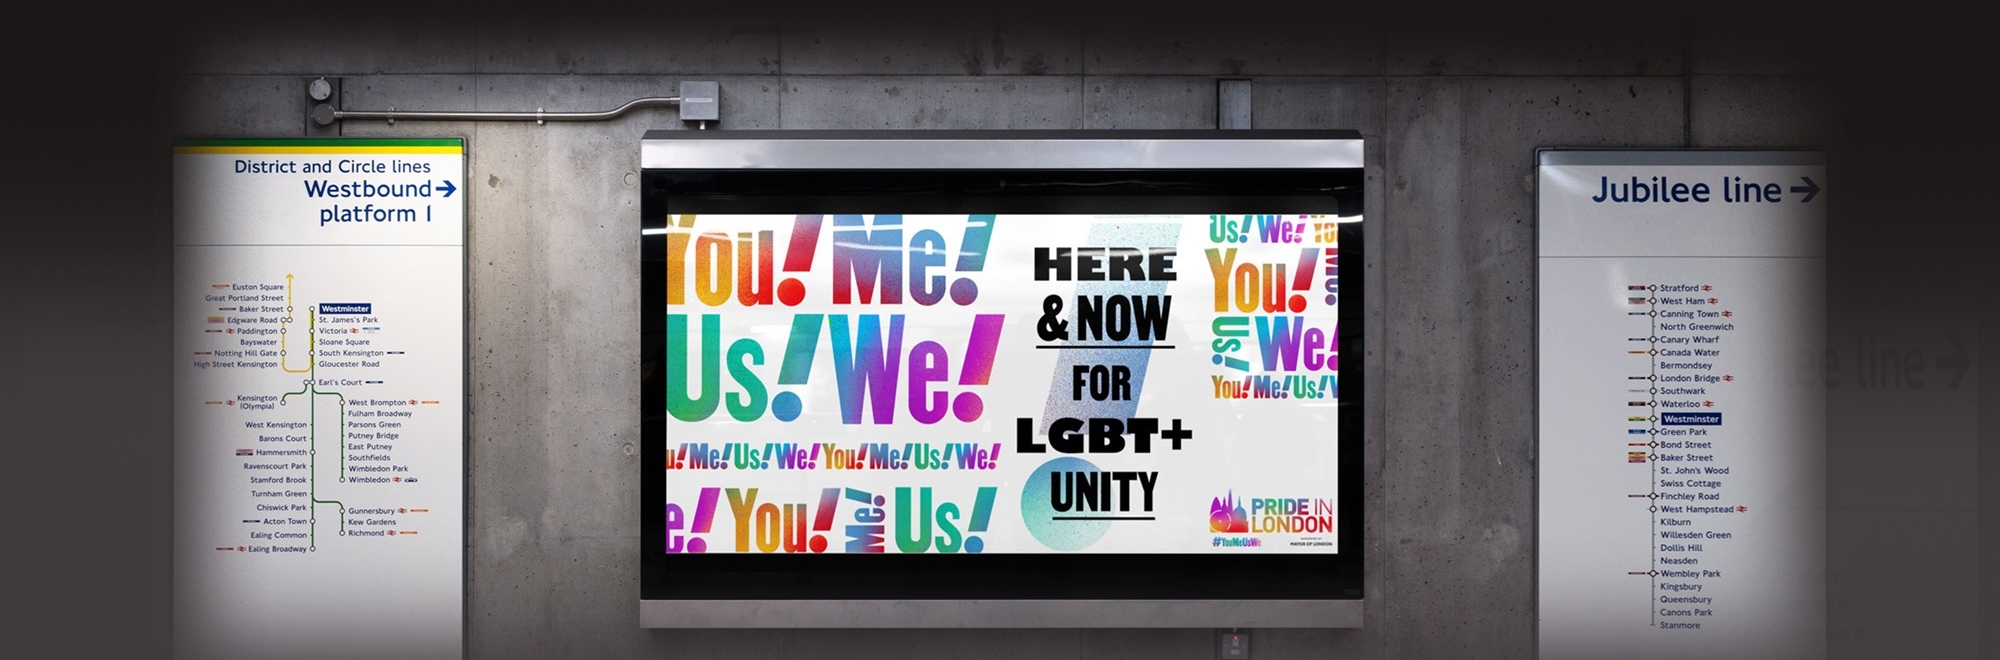 Anomaly and Pride in London launch 2020 campaign with a message of togetherness for the LGBT+ community